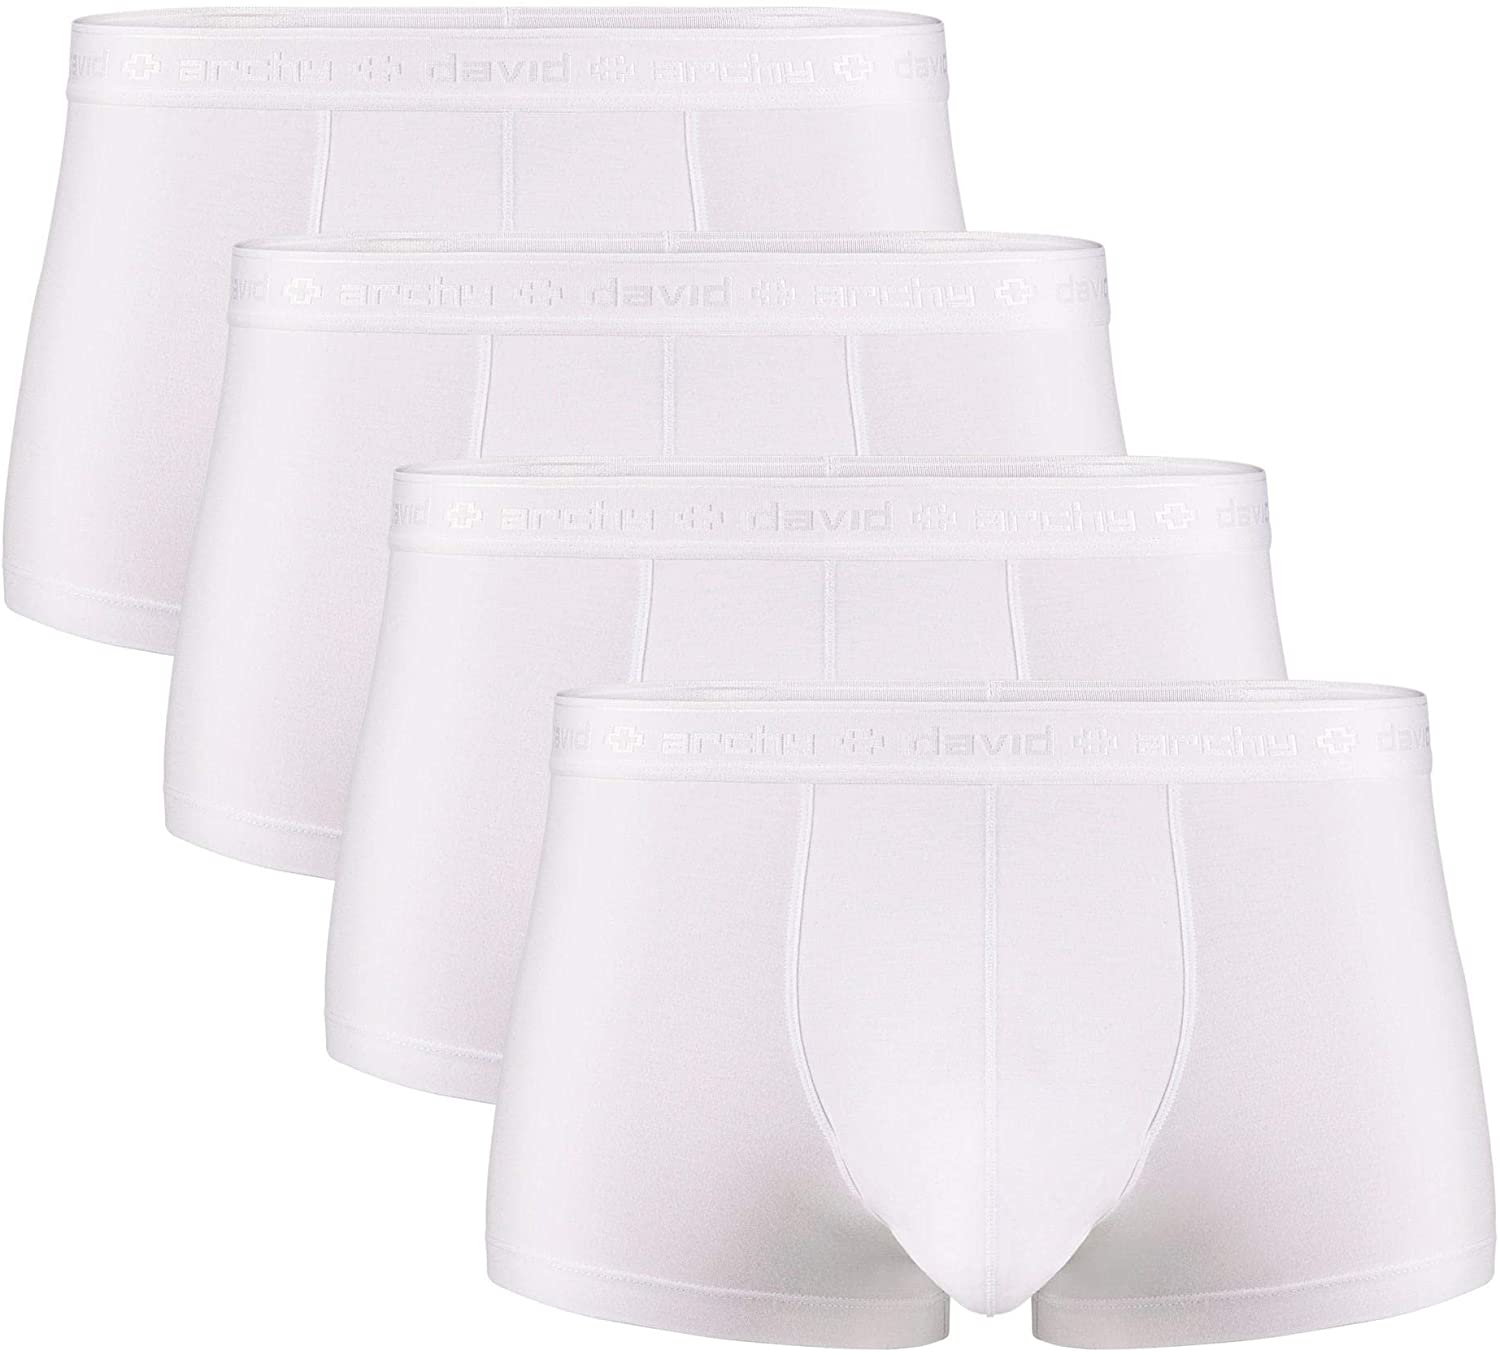 DAVID ARCHY Mens Dual Pouch Underwear Micro Modal Trunks Separate Pouches with Fly 4 Pack 